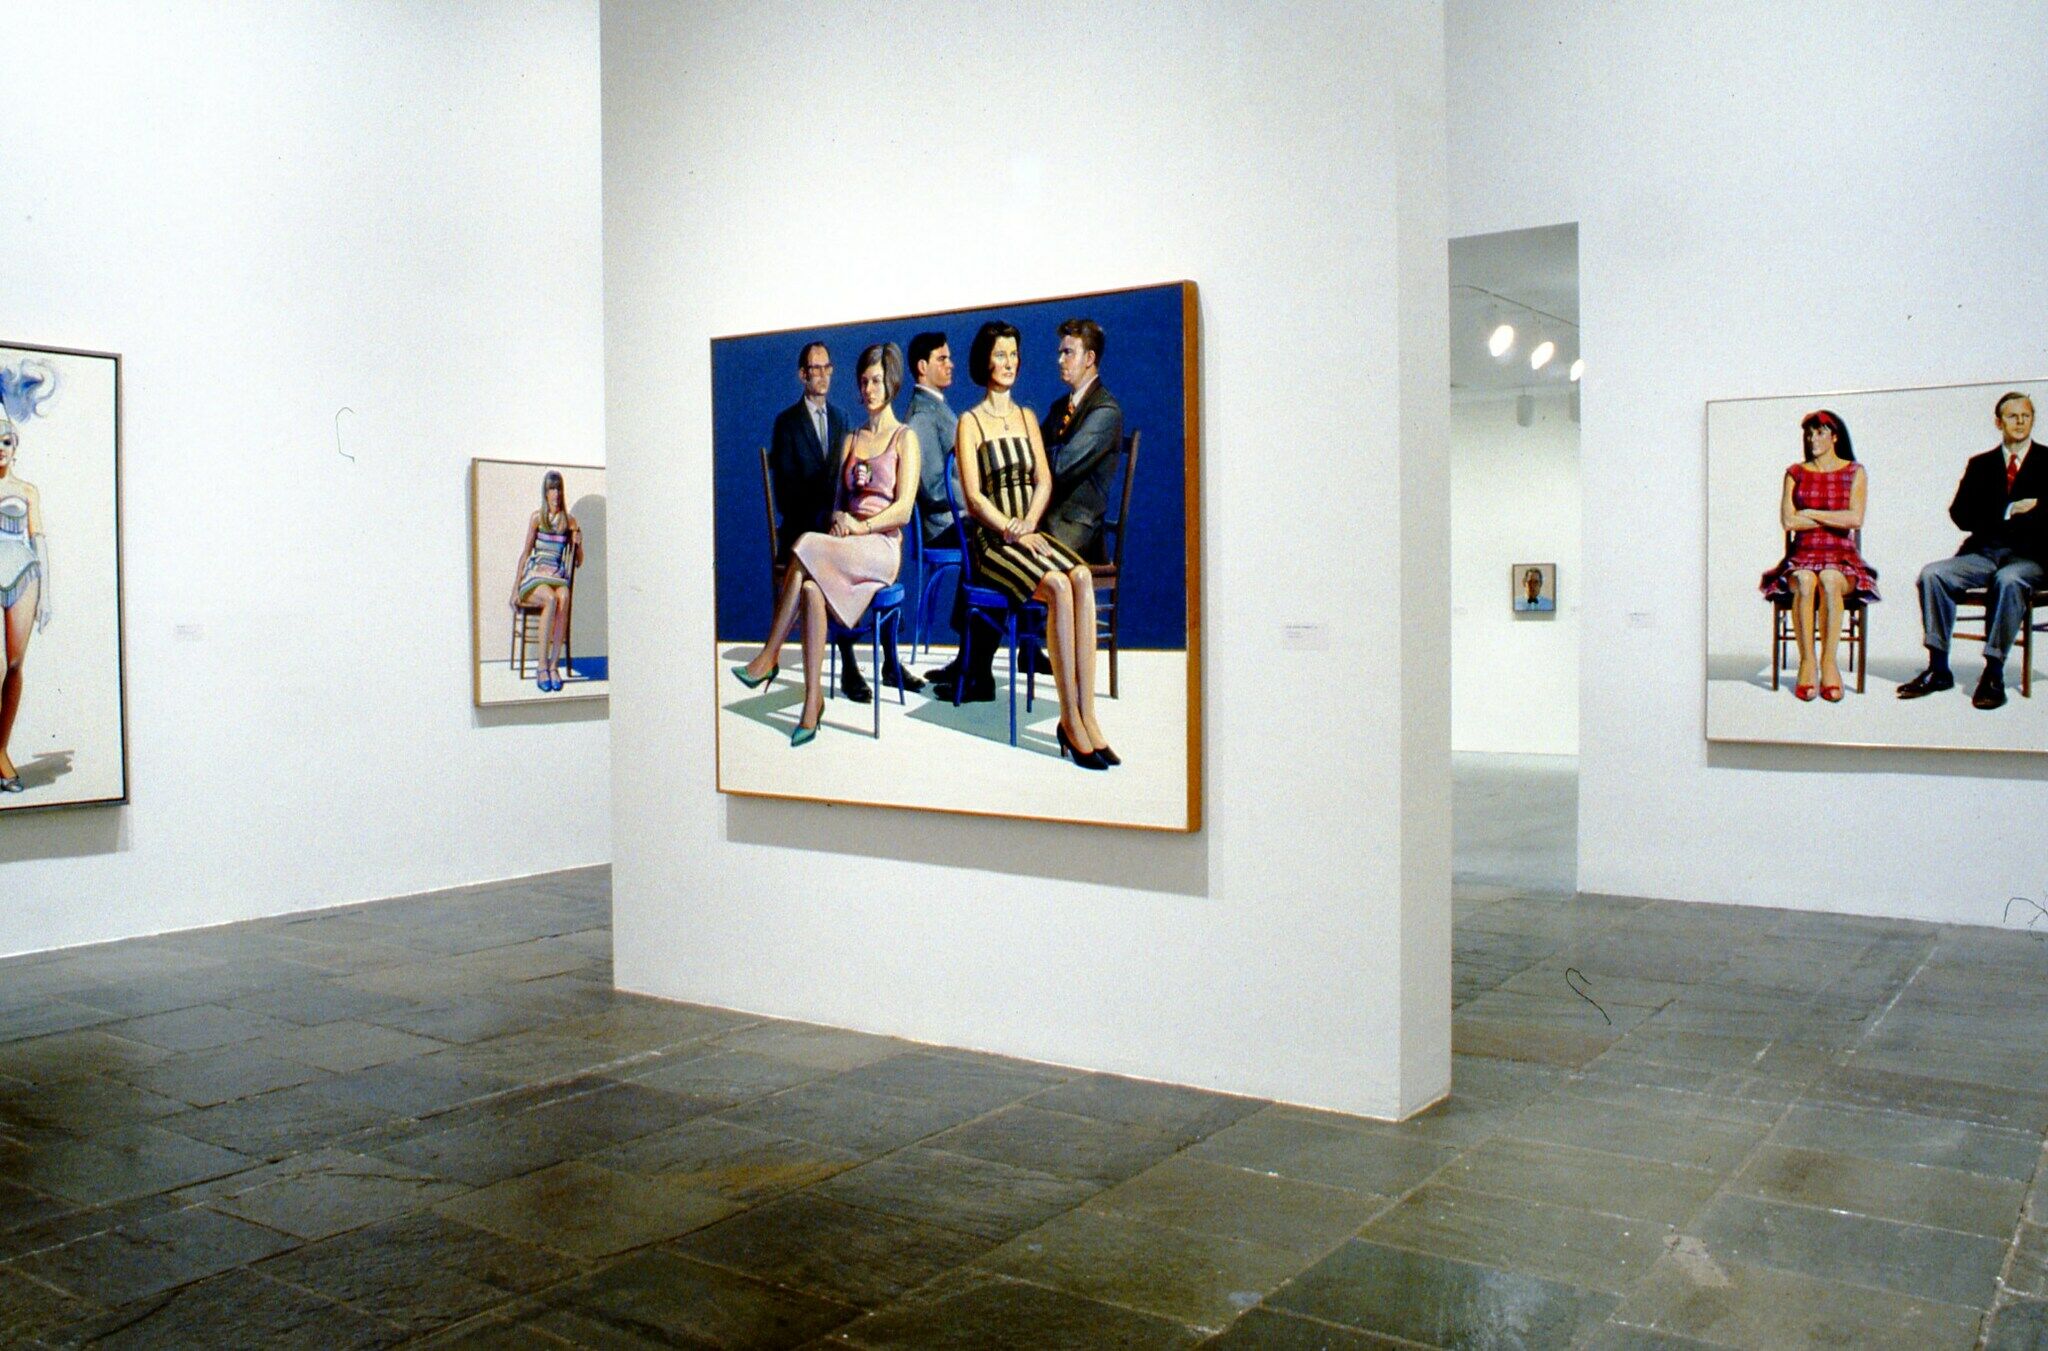 Paintings of figures displayed in a gallery.